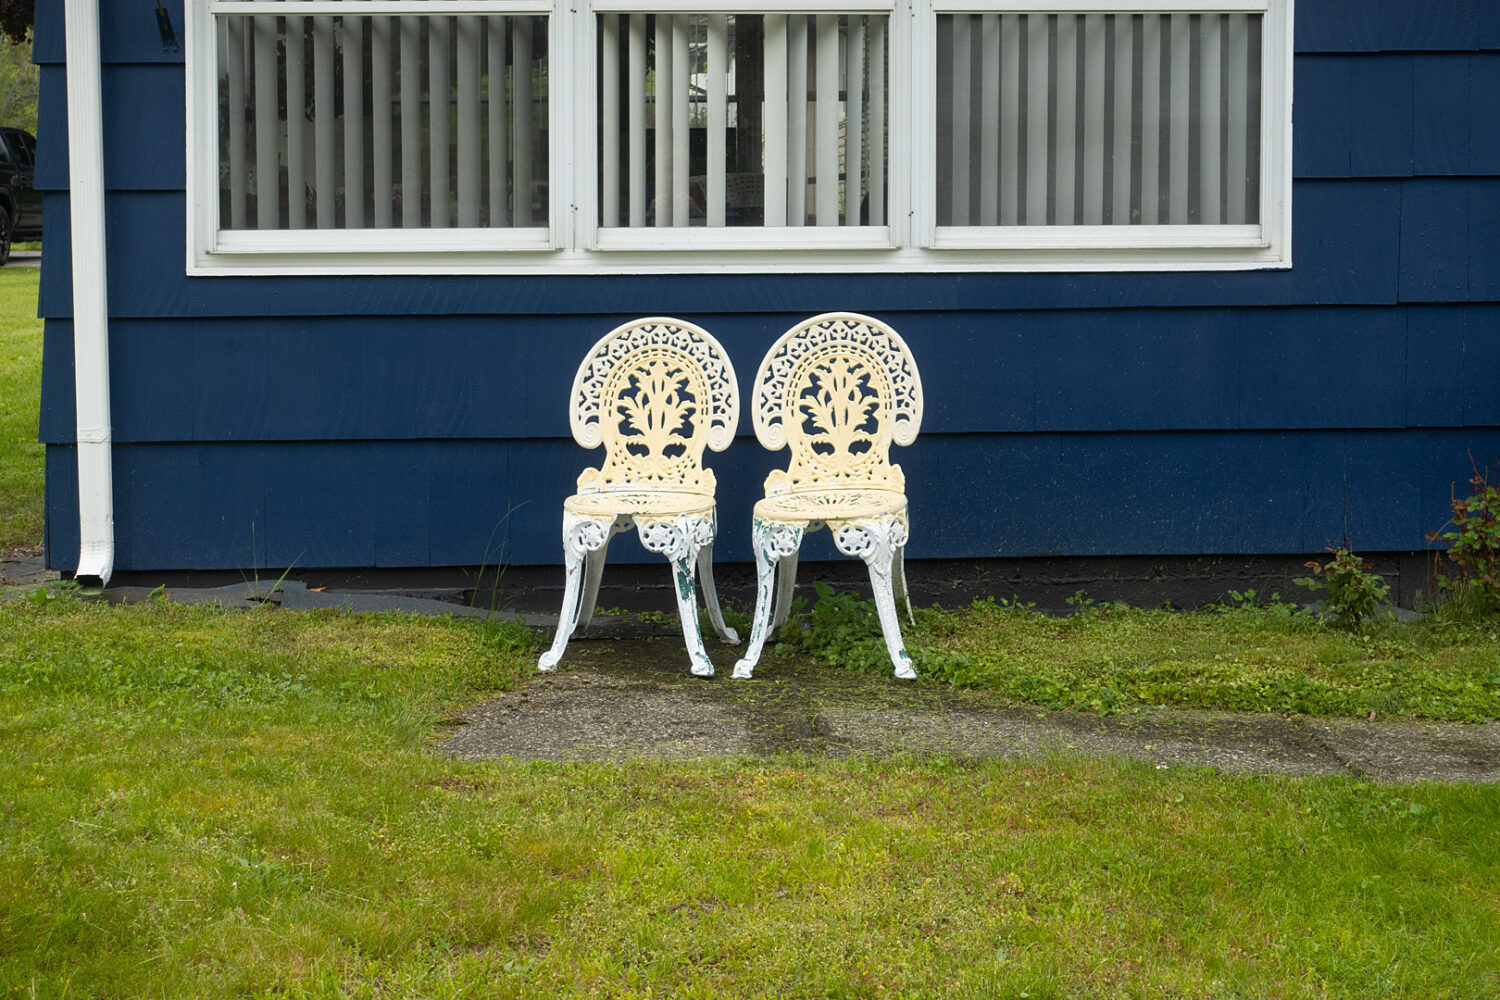 Wrought-iron chairs in front of blue house